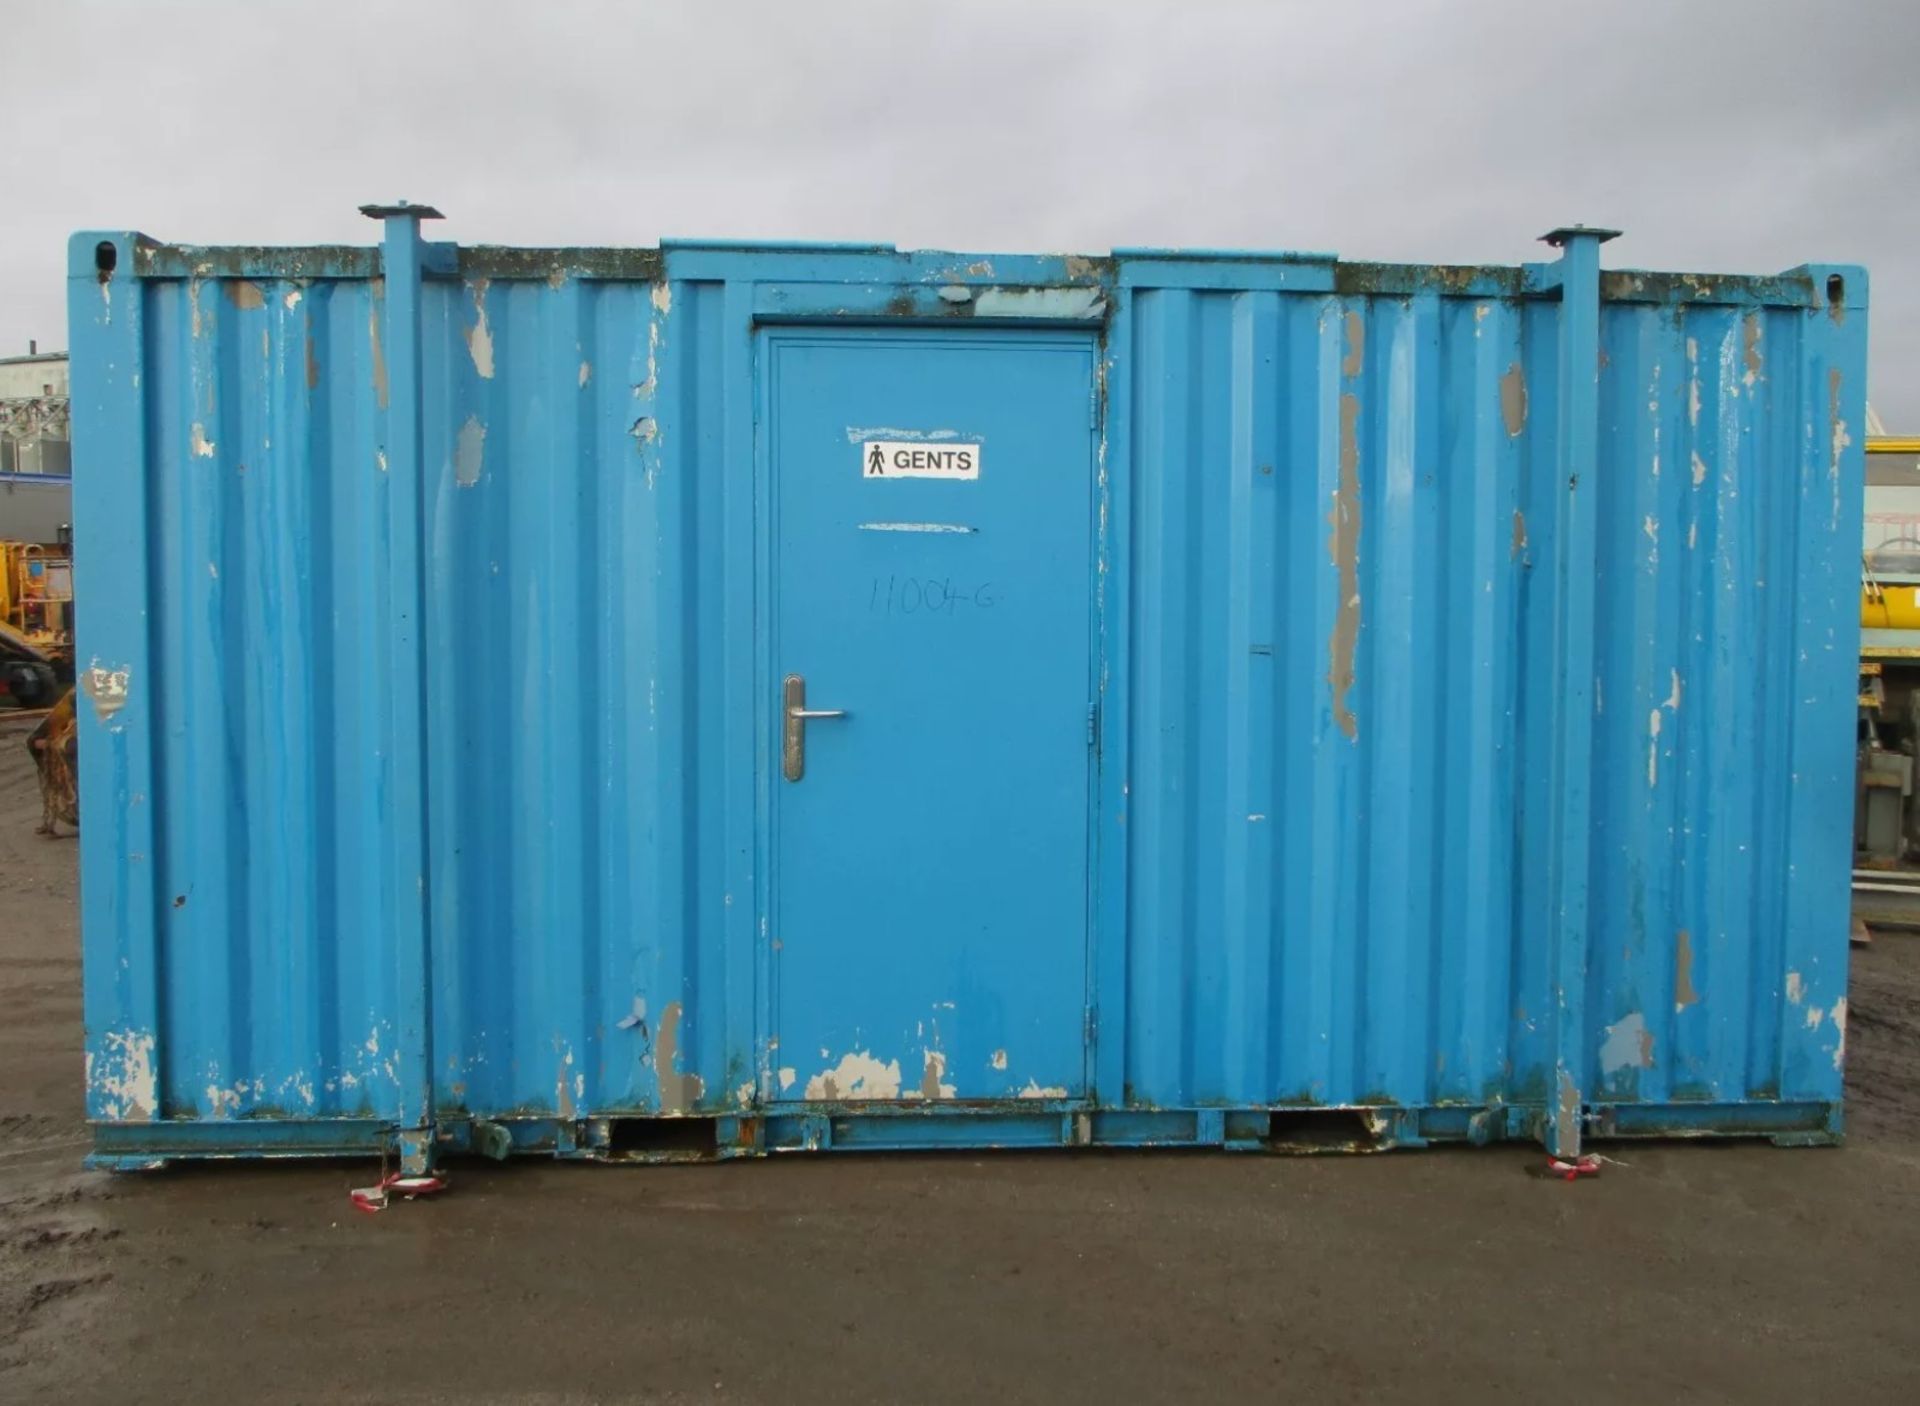 SHIPPING CONTAINER TOILET BLOCK: YOUR COMPLETE PORTABLE SANITATION SOLUTION